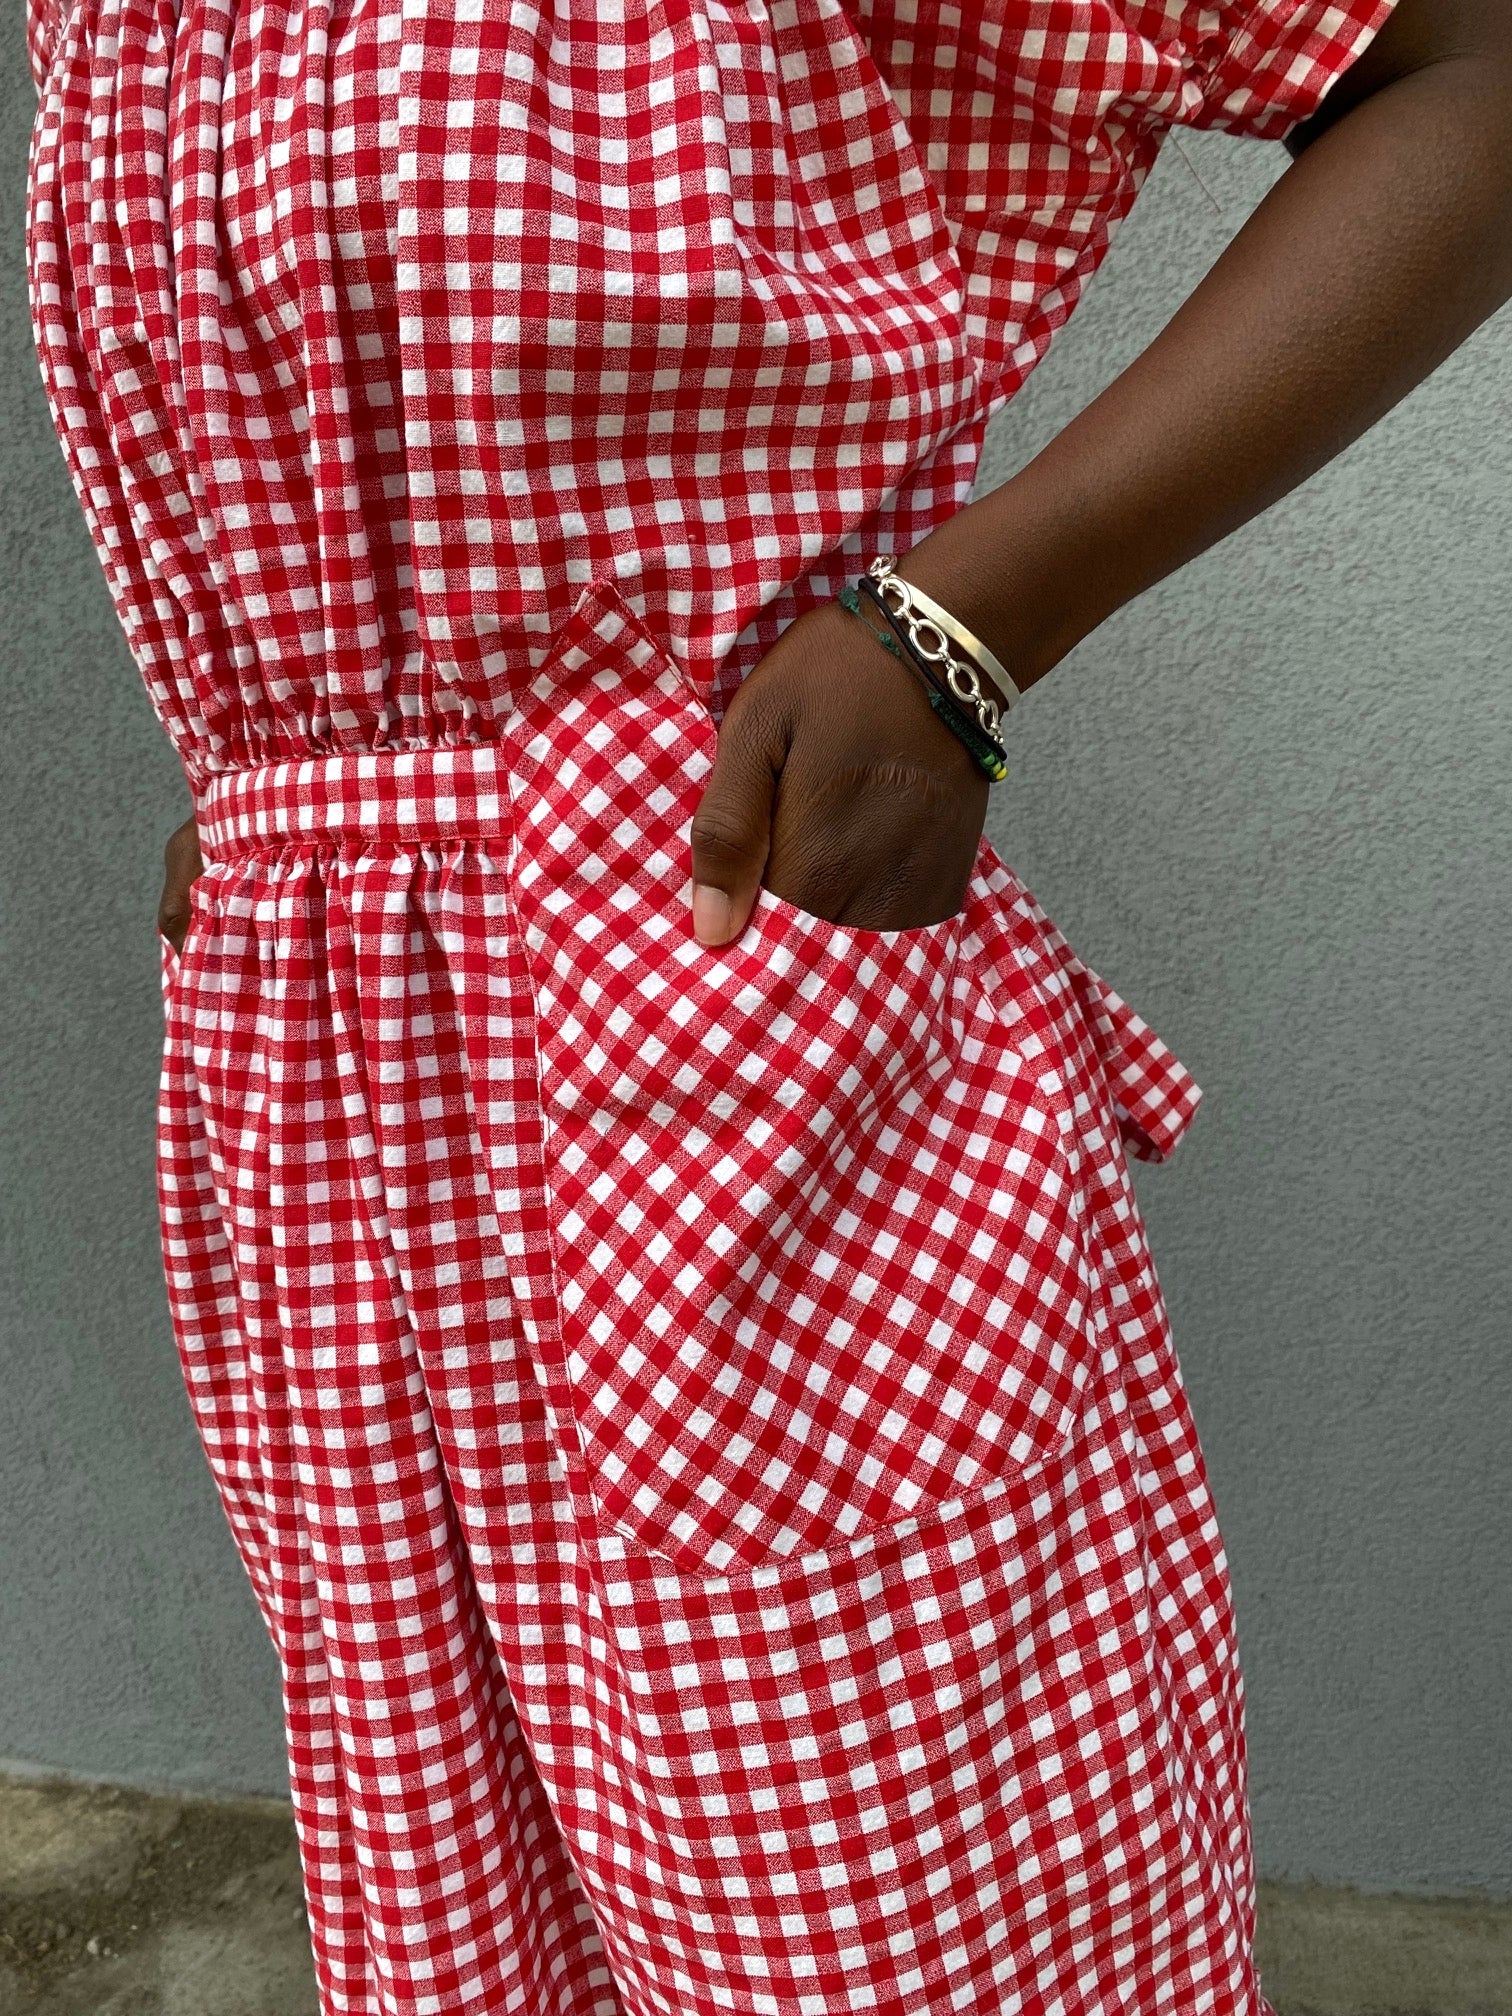 Close up of hand in a pocket of a woman standing in front of grey wall wearing a red and white check dress with short puffed sleeves and a bottom flounce.